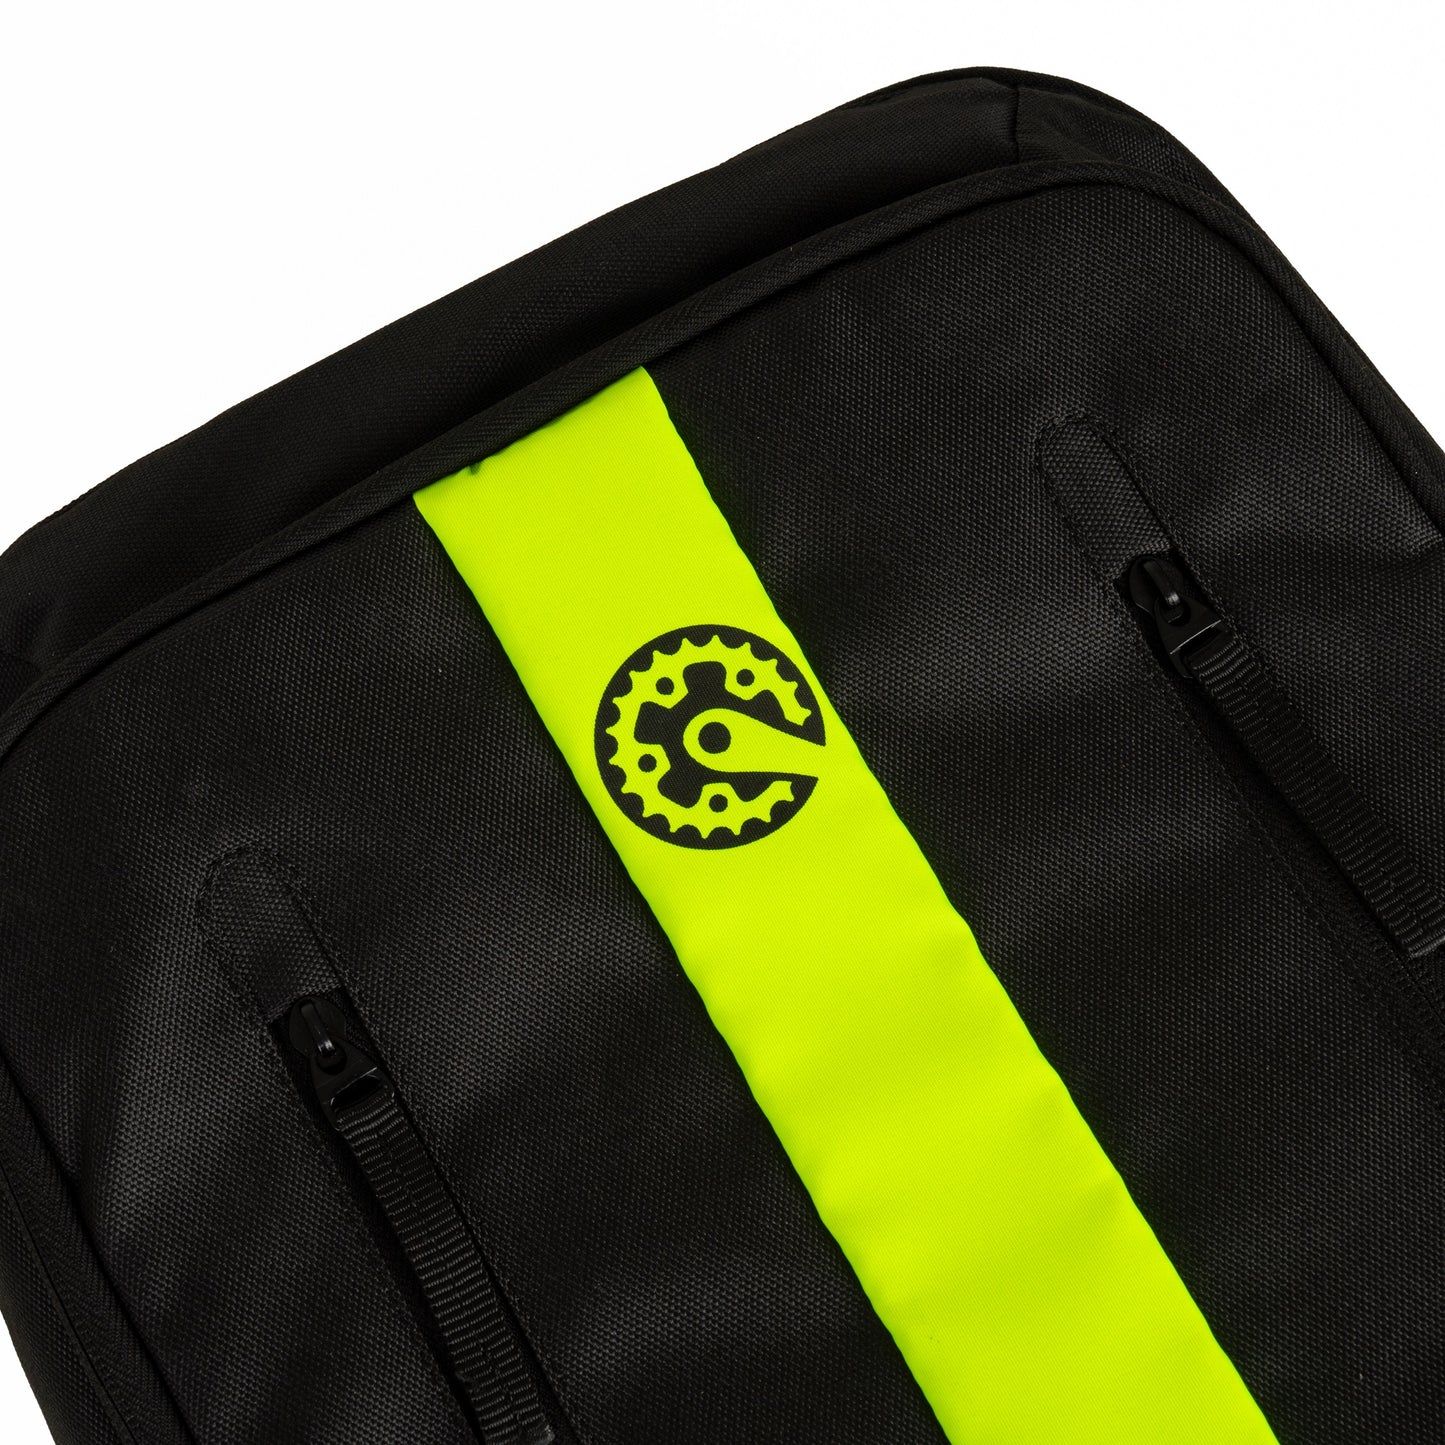 AZA x MAINSEPEDA Backpack Bag Safety First Edition - Black / Neon